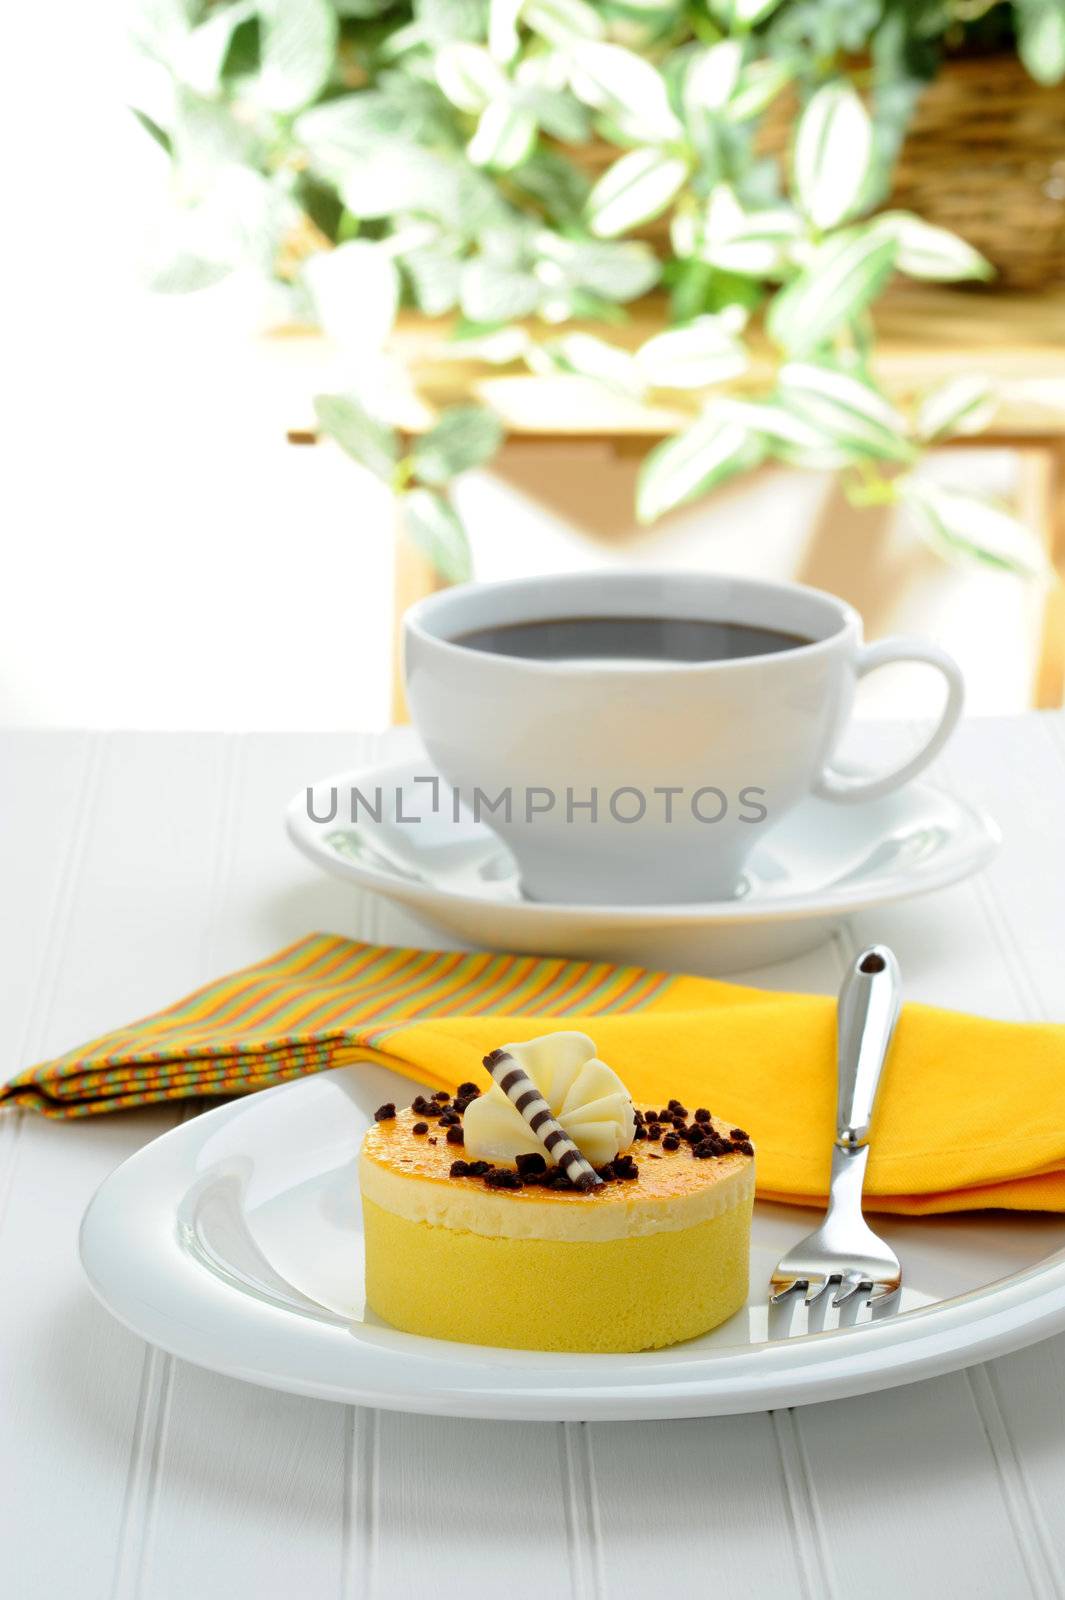 Delicious lemon cake served with fresh coffee.